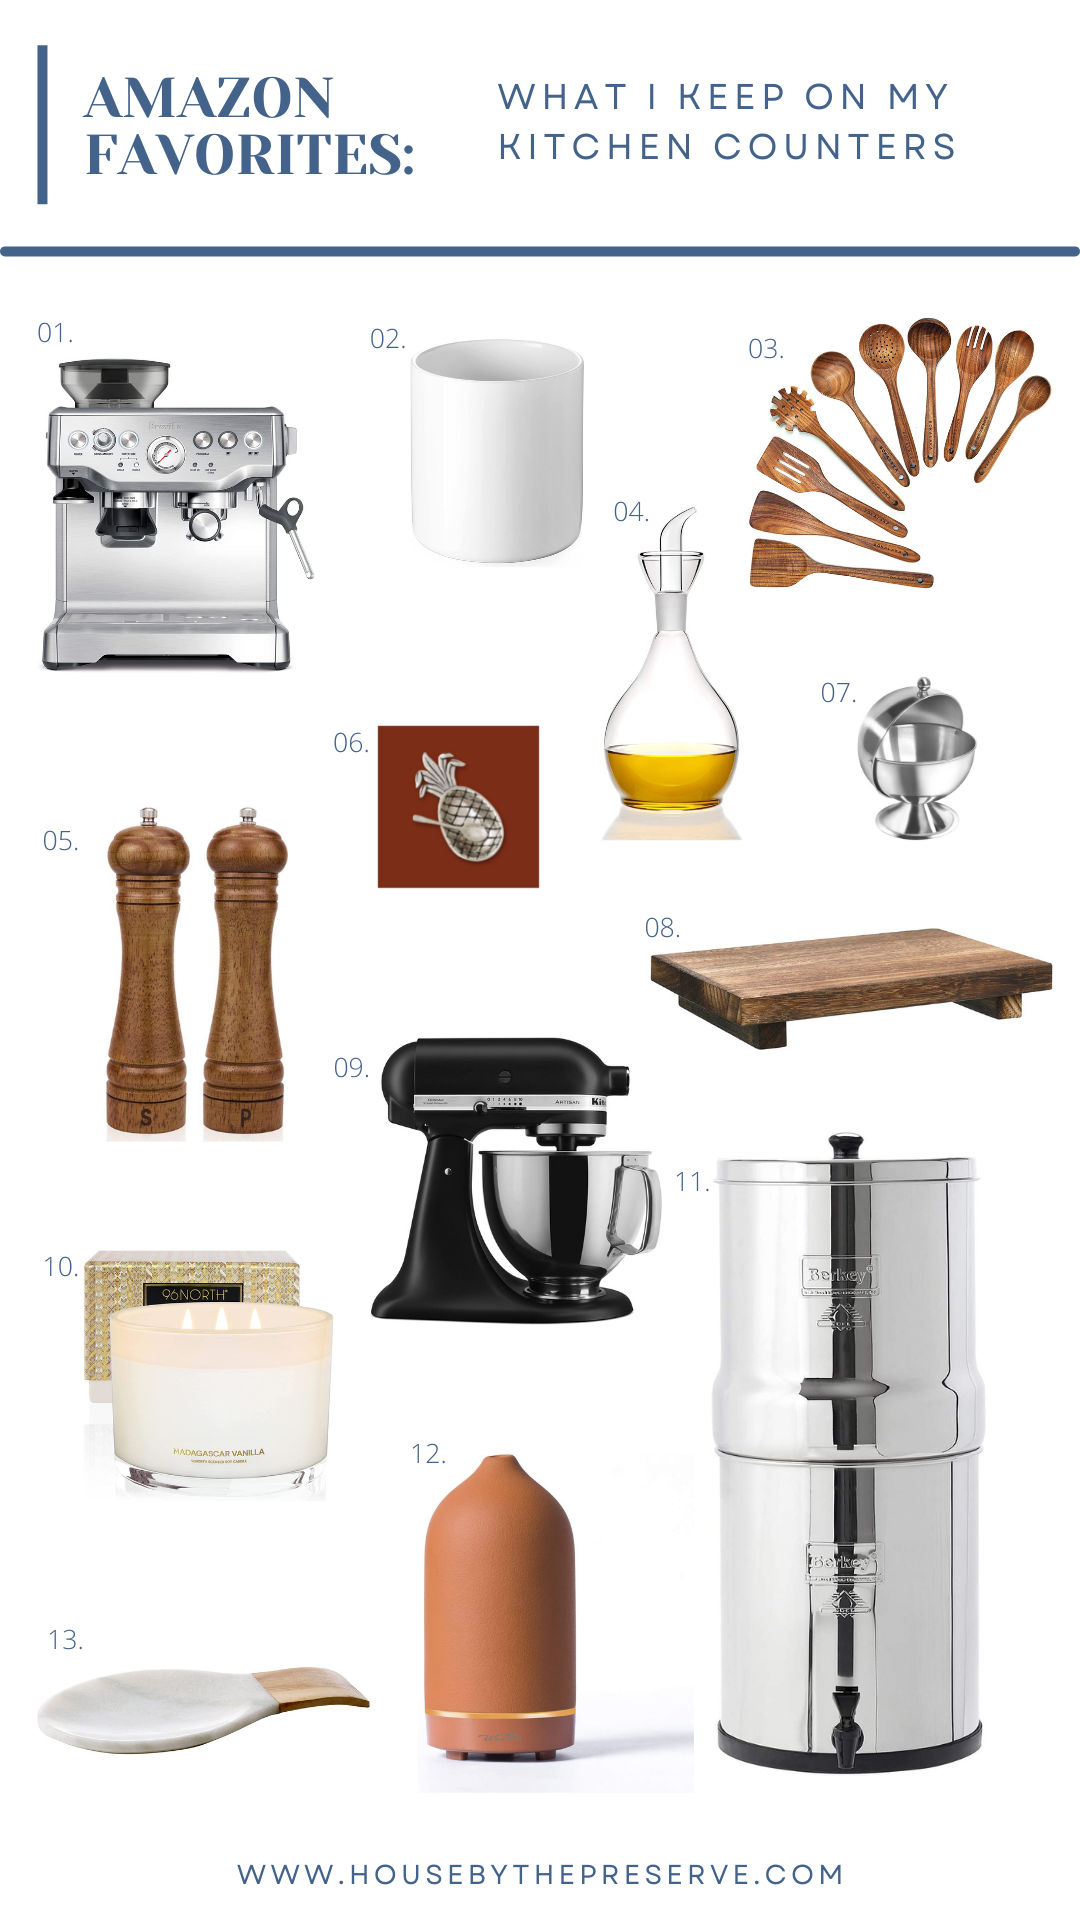 I write about kitchen gear for a living, and my favorite Made In